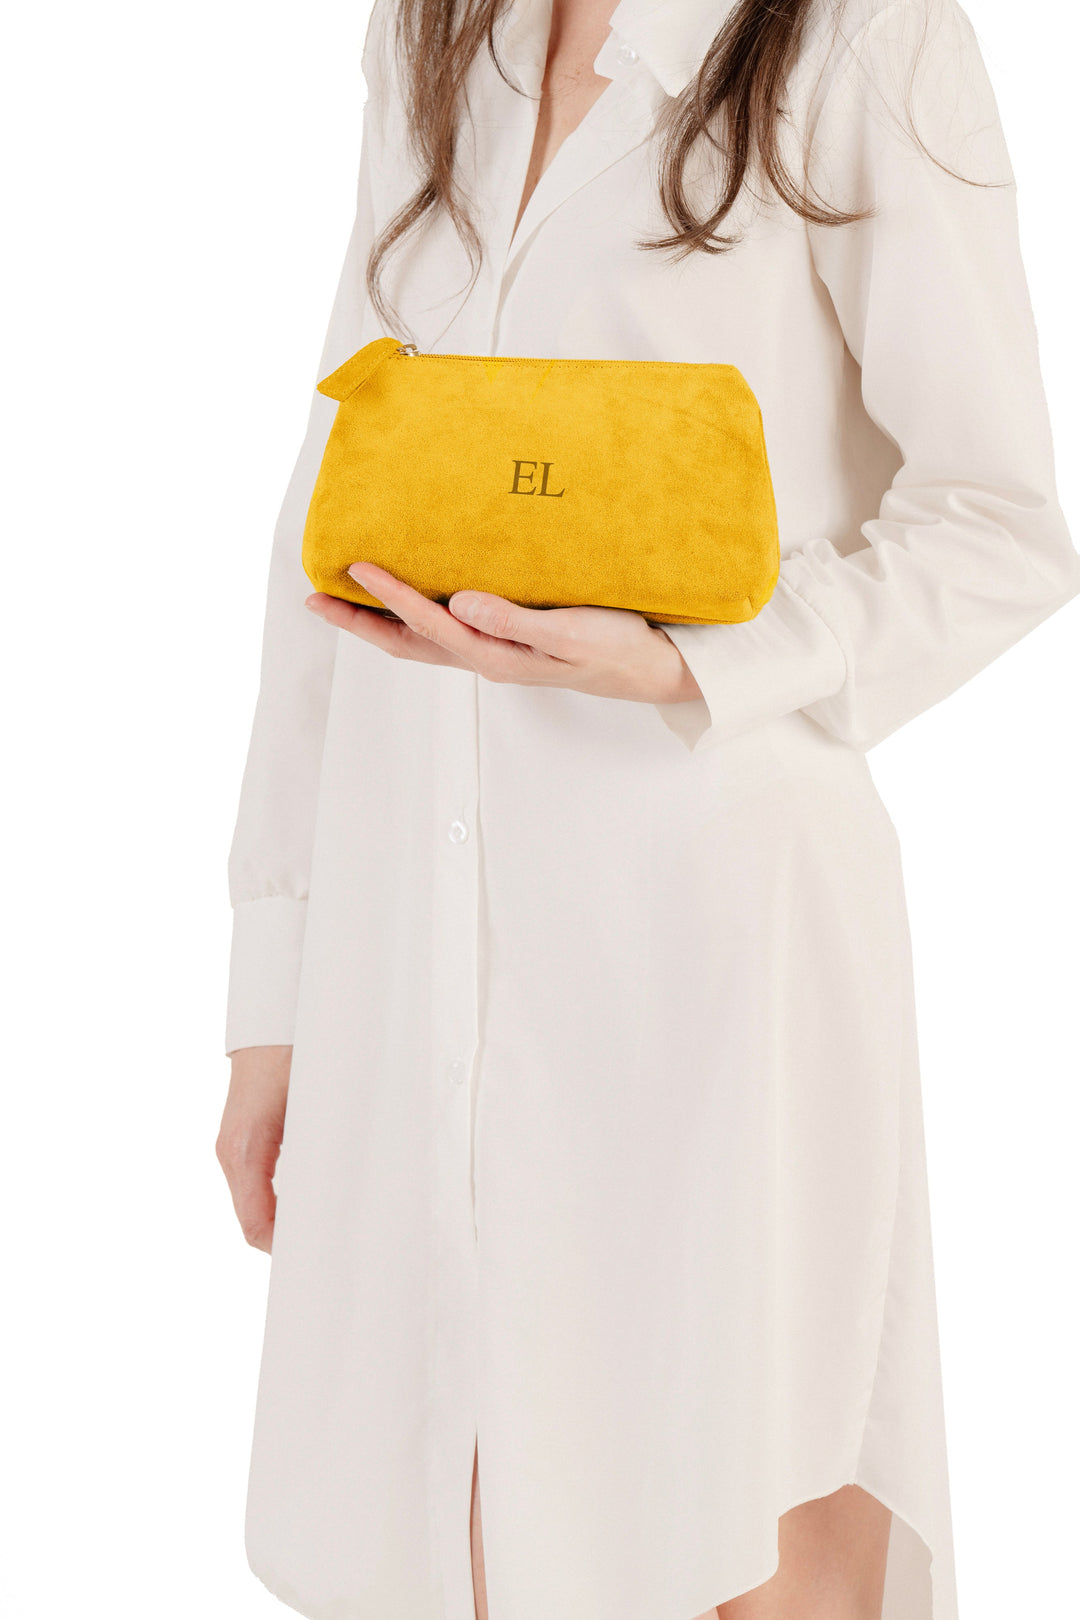 Woman in white dress holding yellow suede clutch bag with initials EL